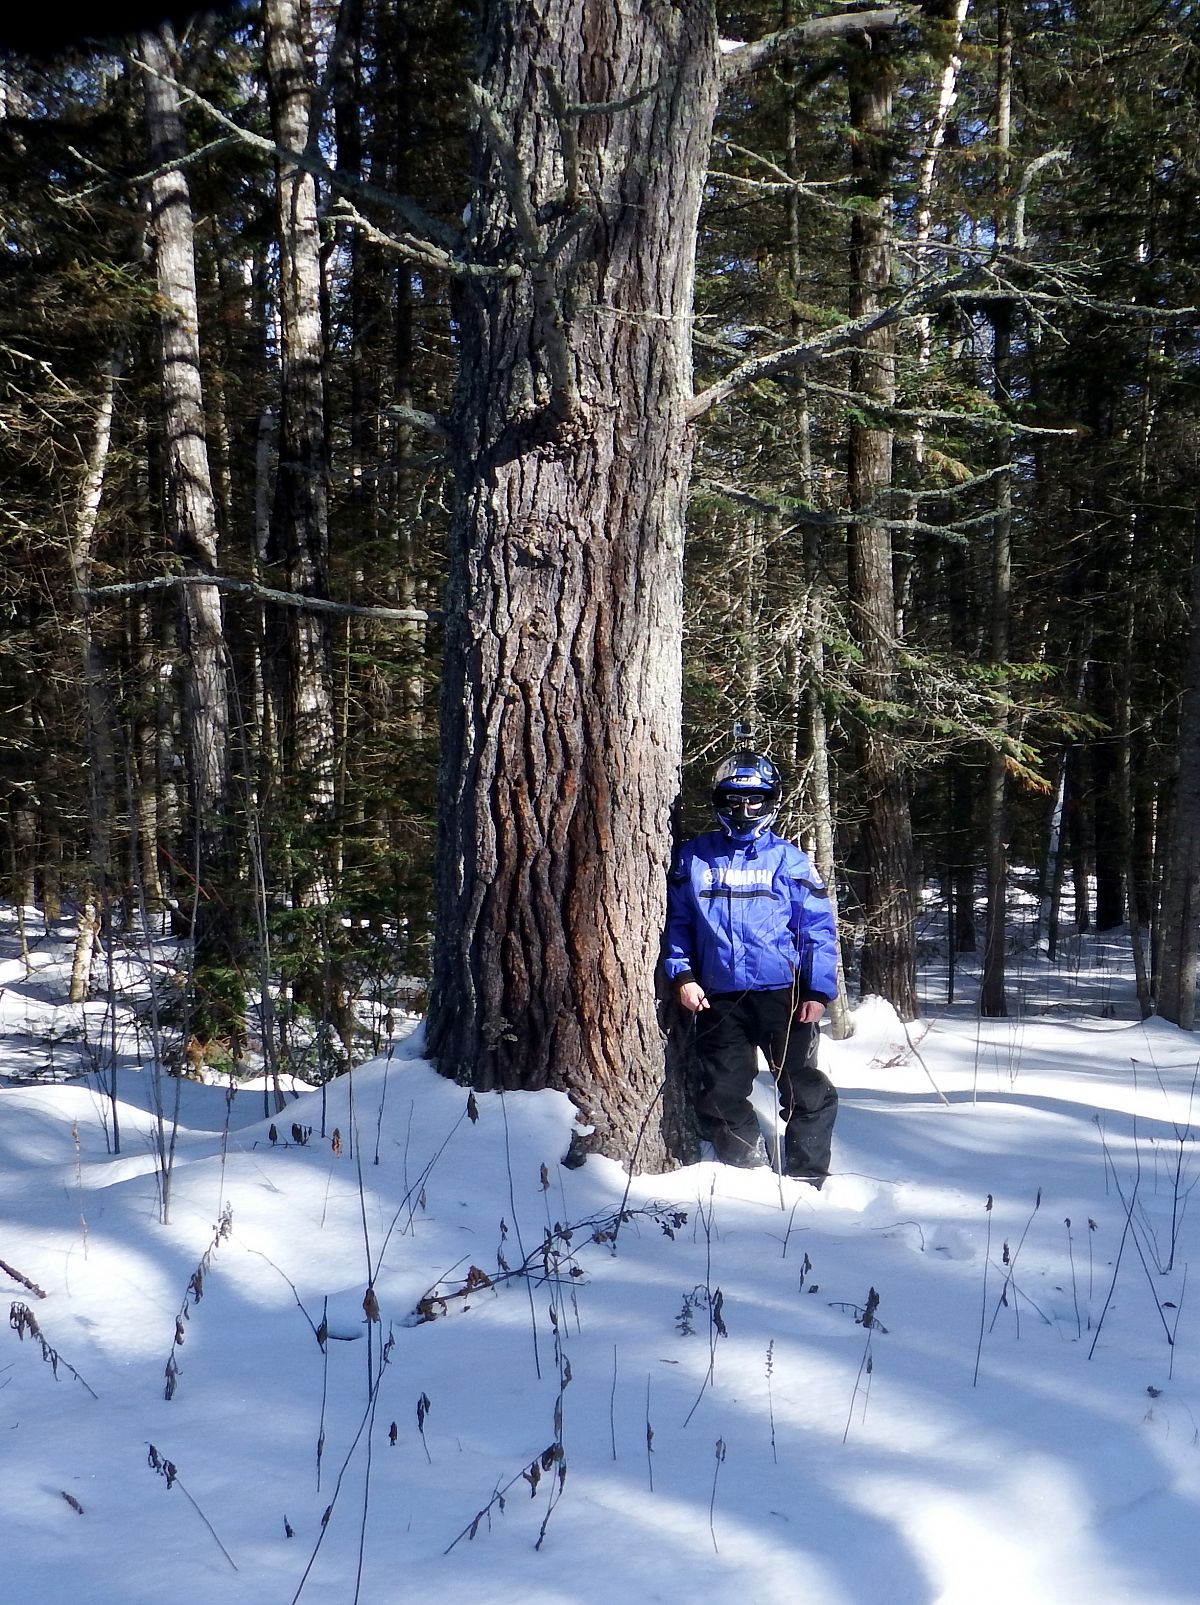 A 200 plus year old red pine on the trail from Buffalo Point to Moose Lake.